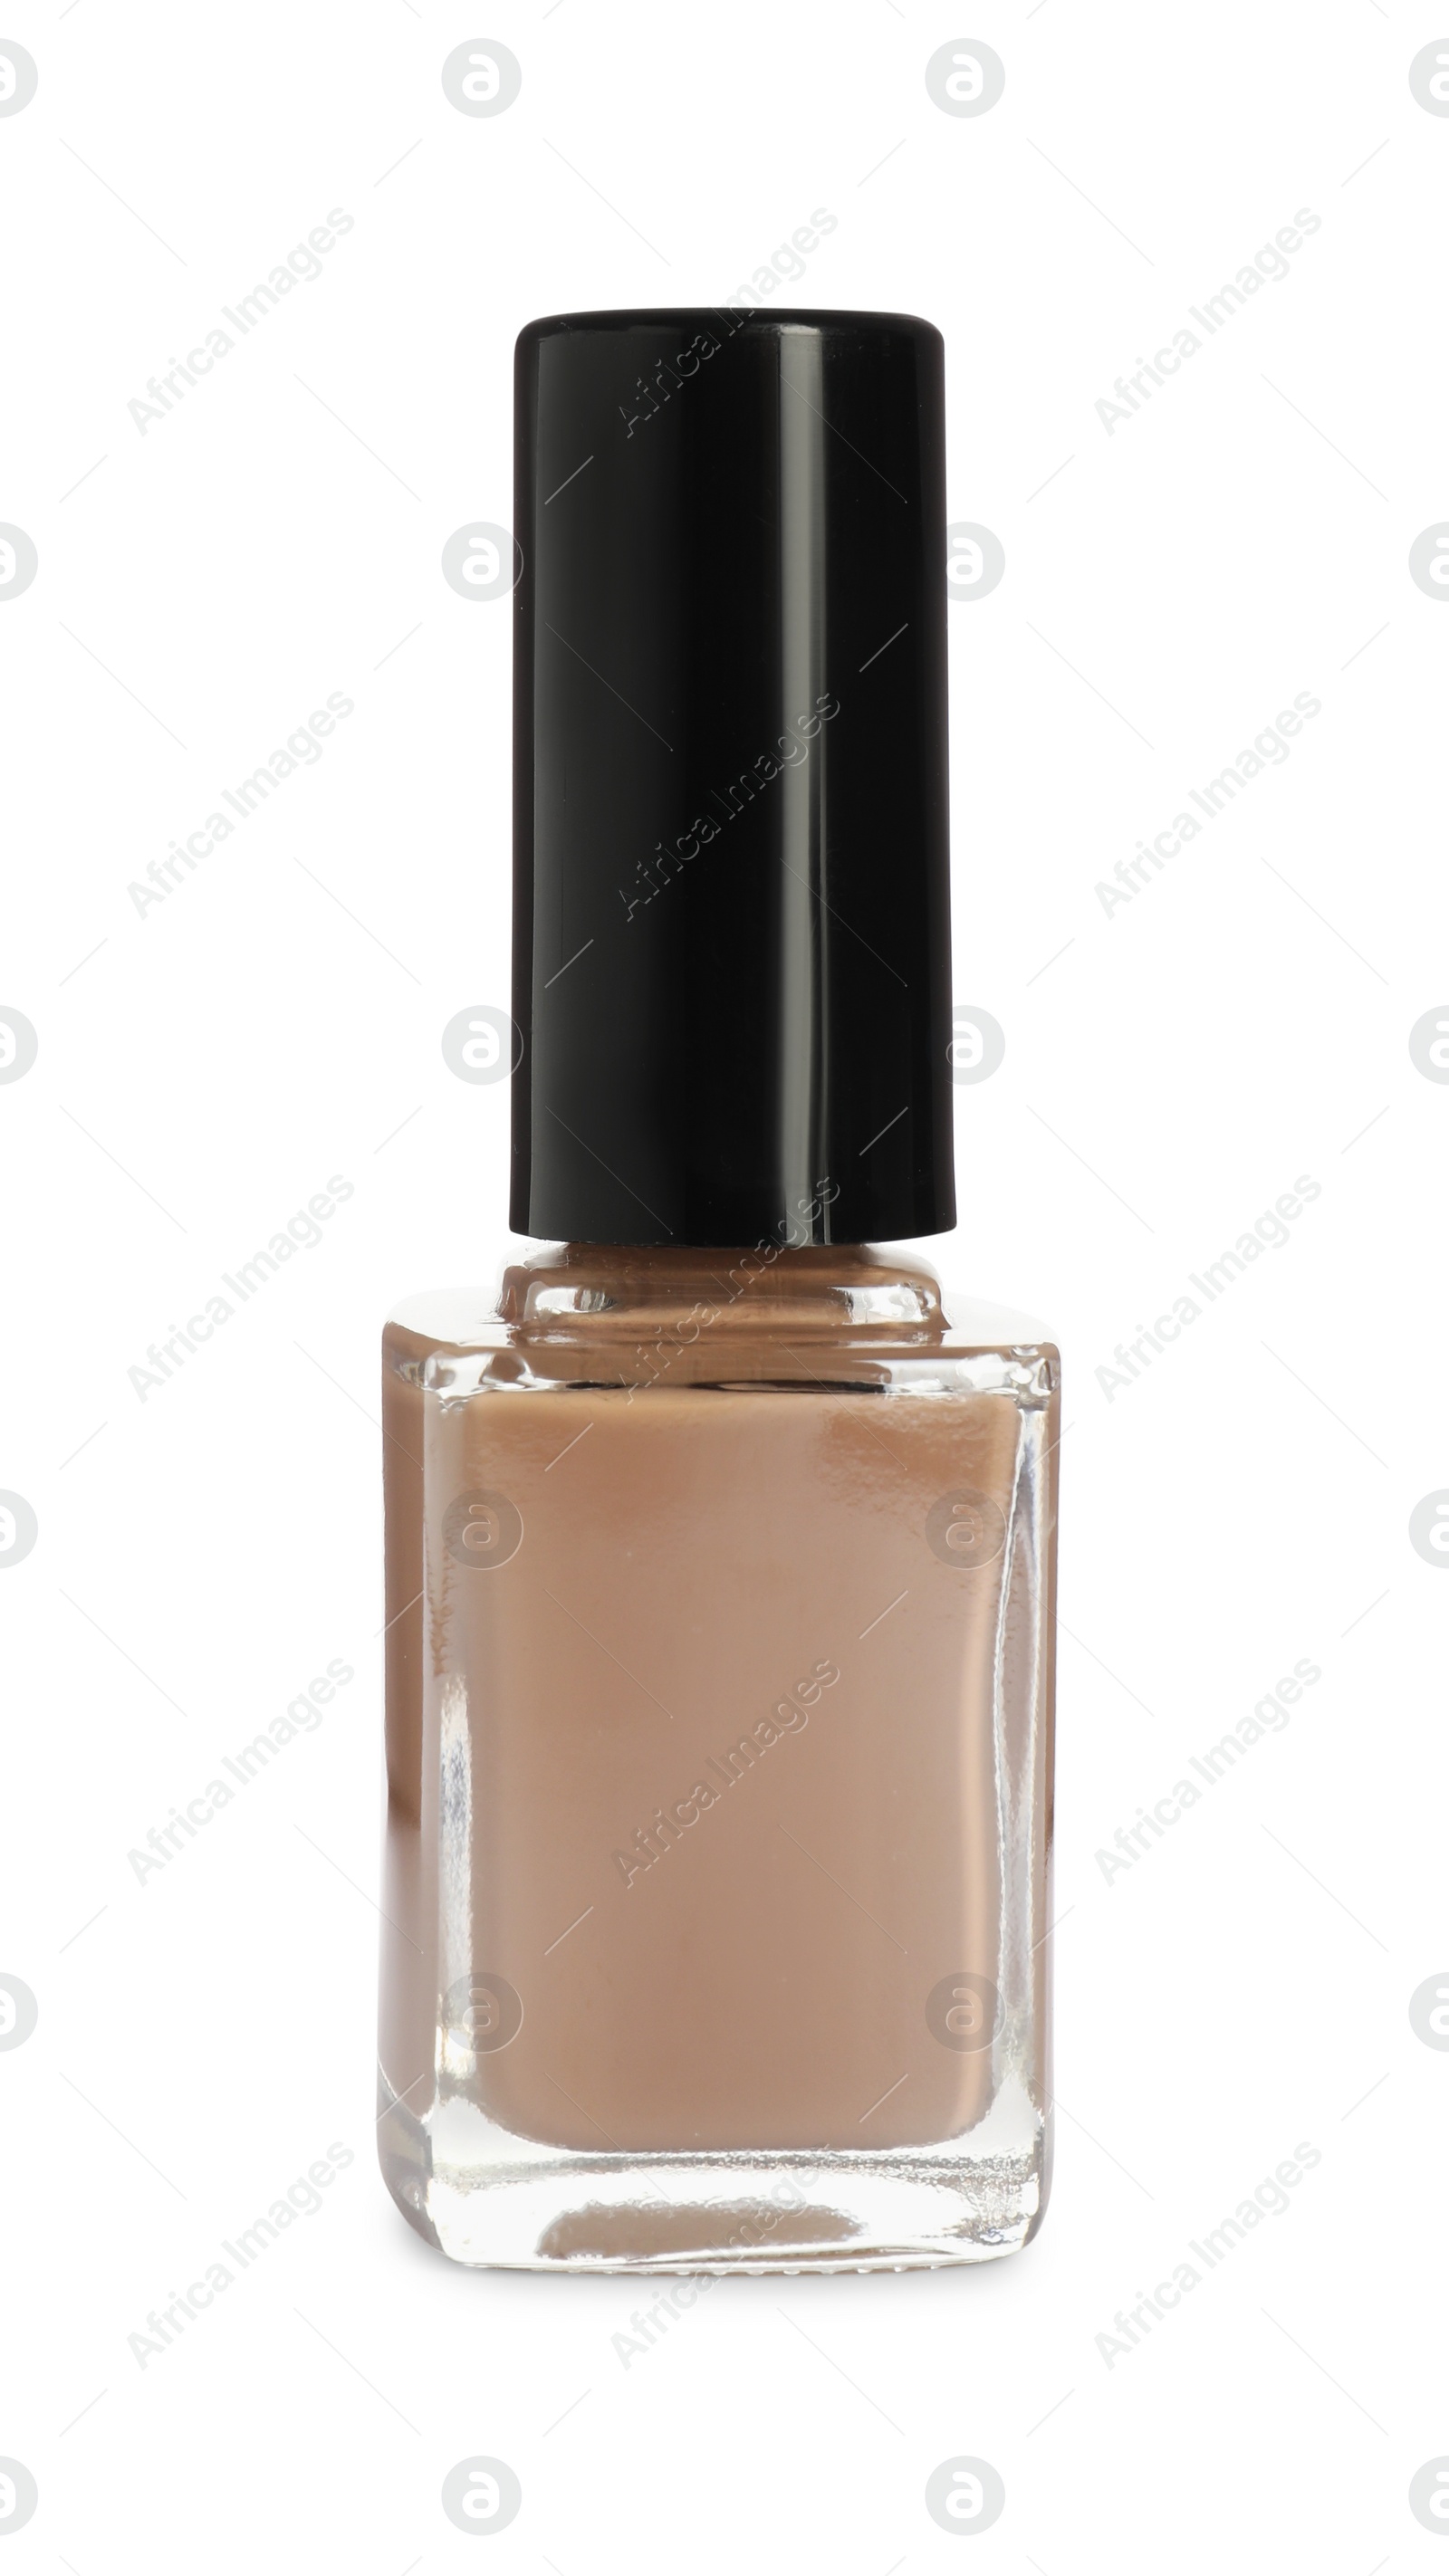 Photo of Beige nail polish in bottle isolated on white